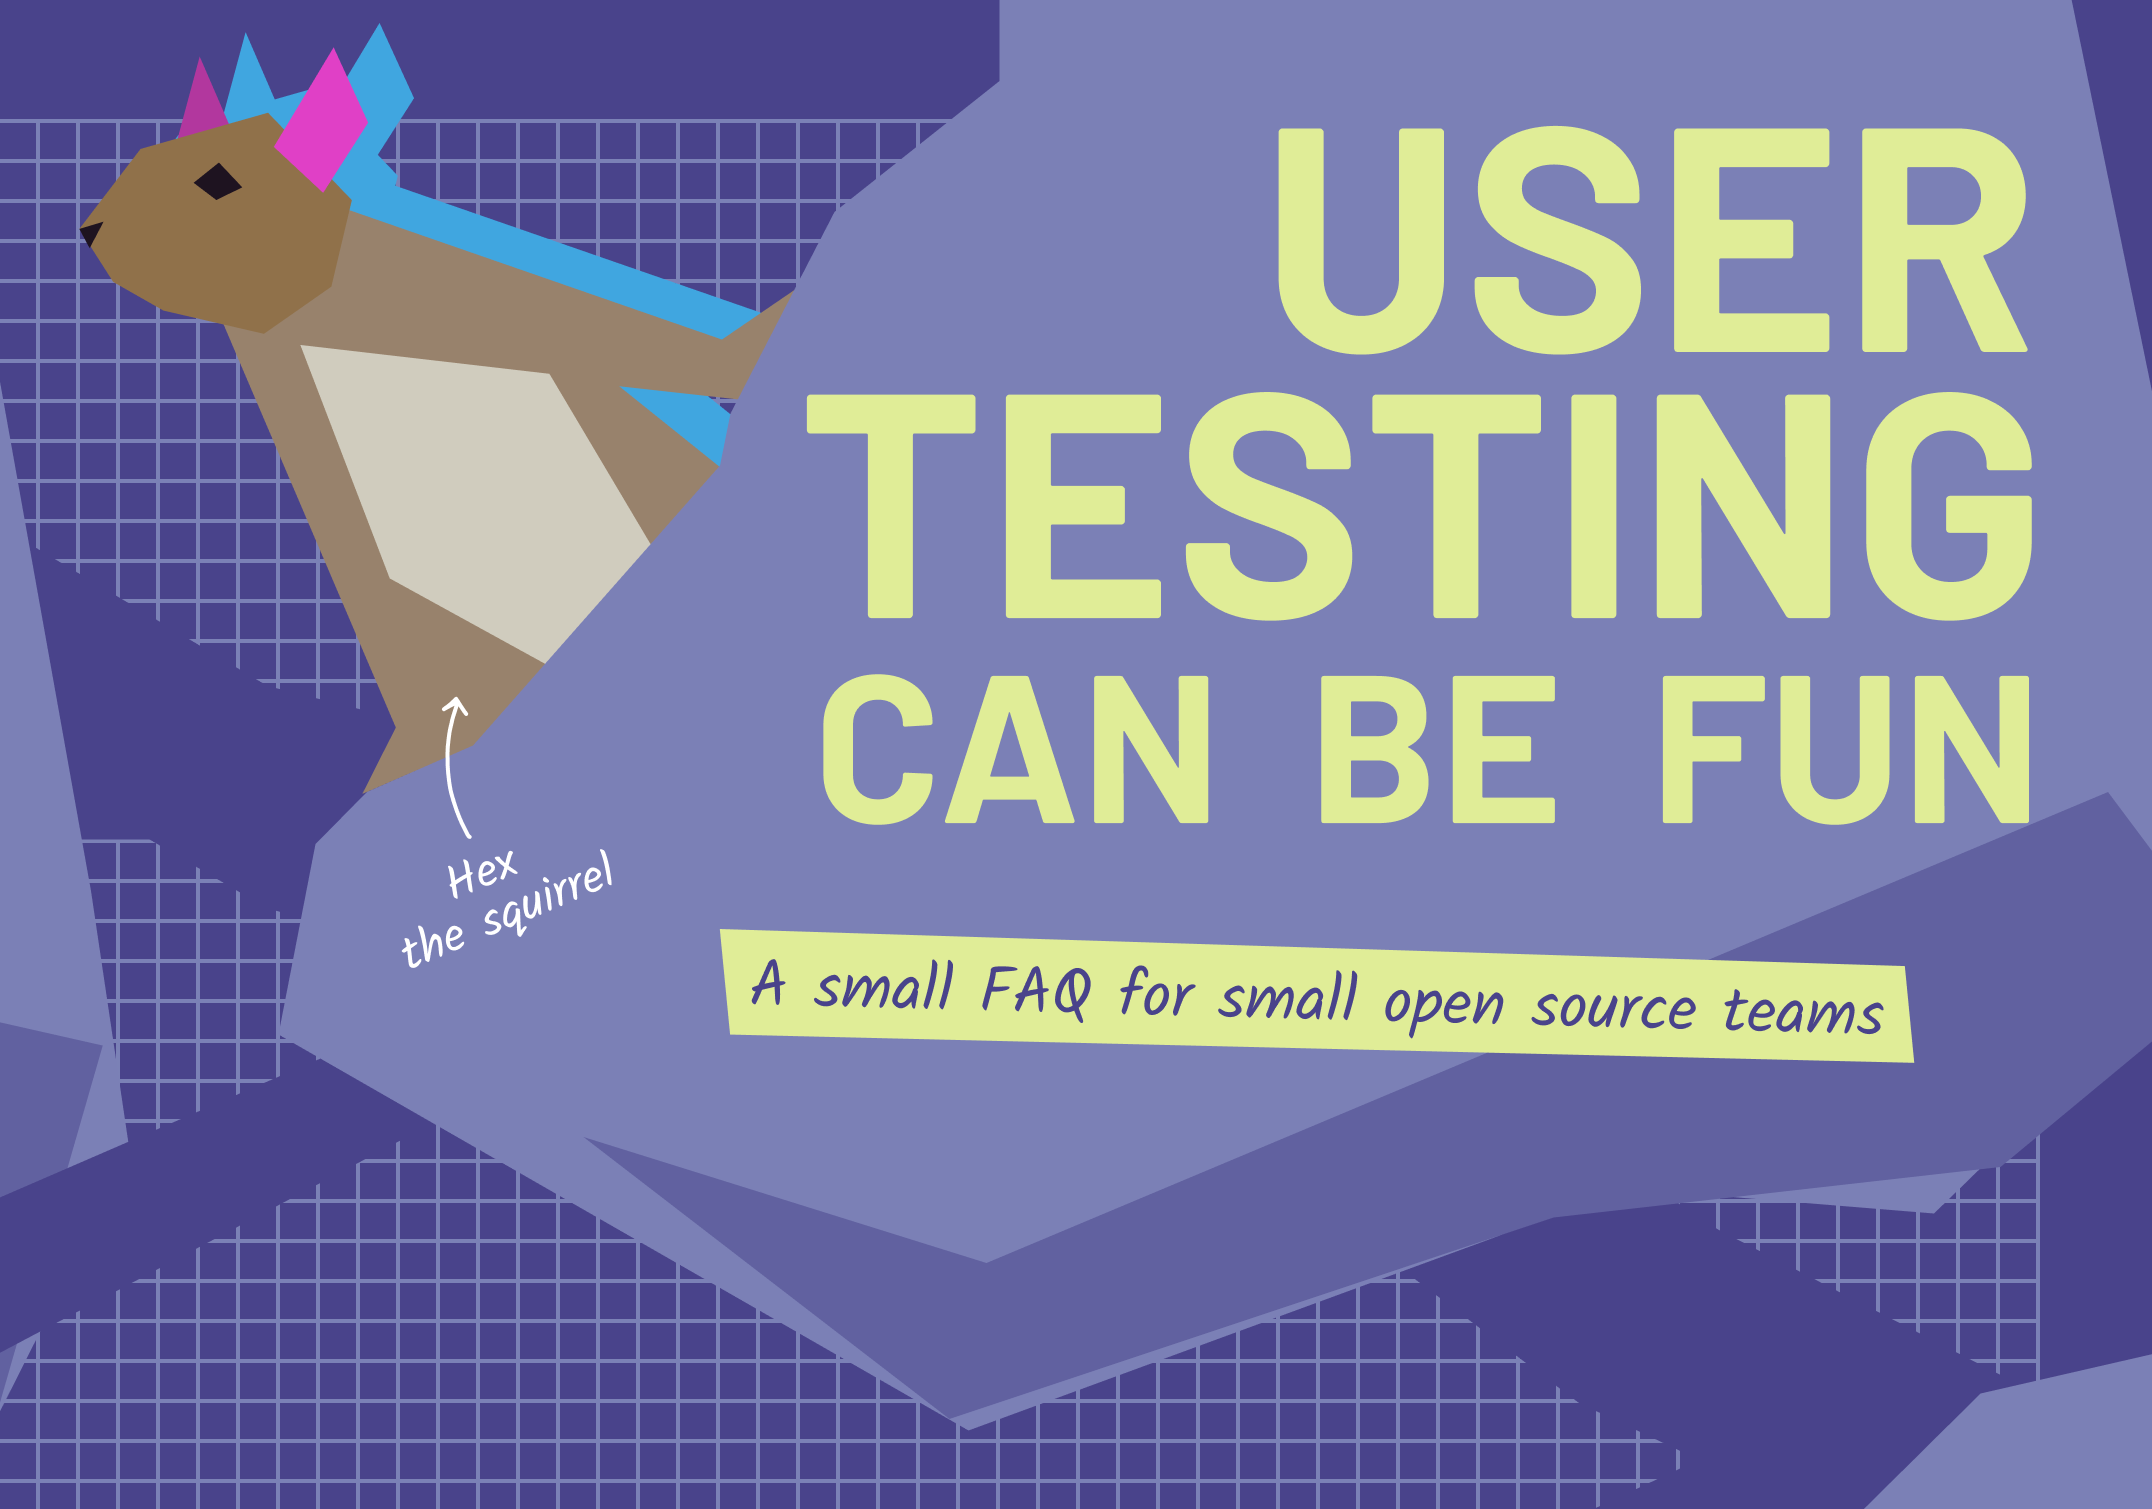 User testing can be fun - poster version